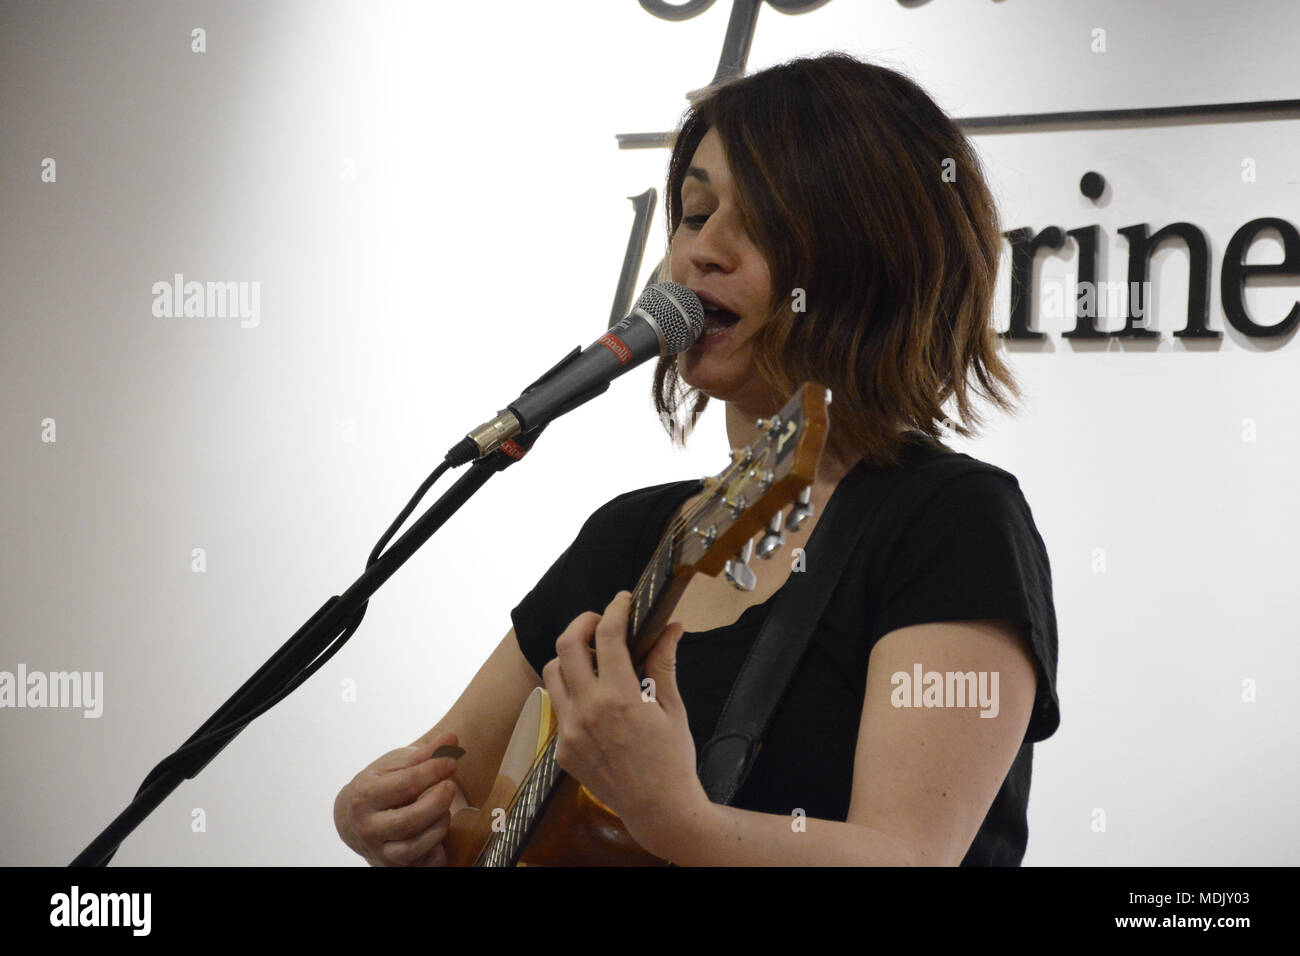 Naples, Italy. 19th Apr, 2018. Carmen Consoli, Italian singer presents her album 'Eco di sirene' at the Feltrinelli in Naples and performs live in an acoustic mini-set. Credit: Mariano Montella/Alamy Live News Stock Photo